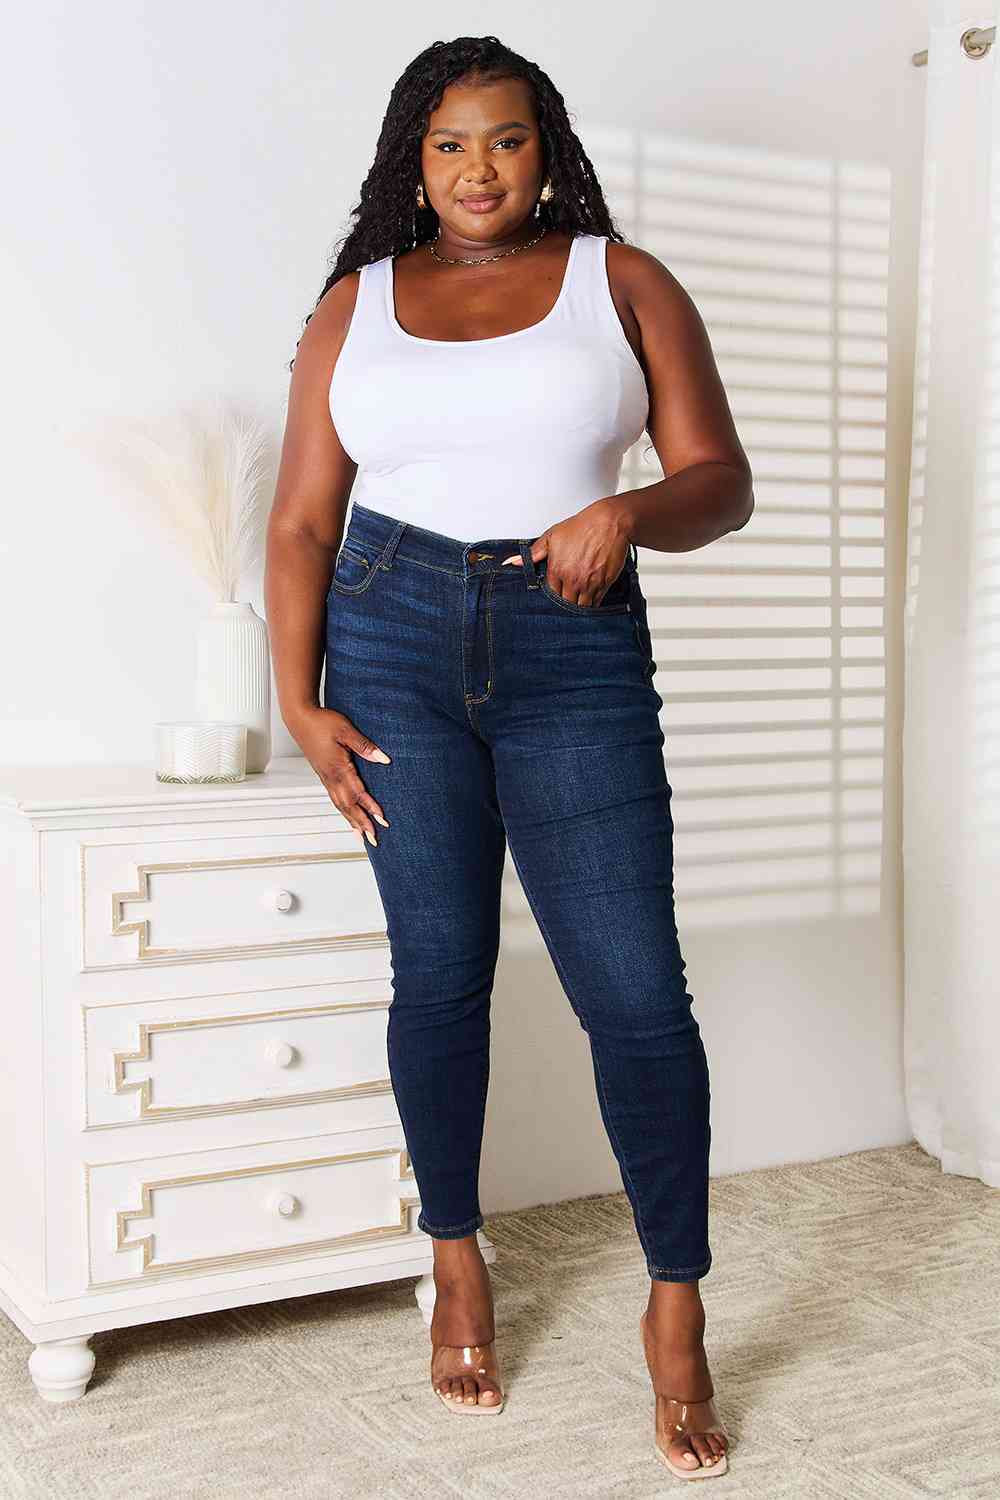 Plus Size, Judy Blue, High-Rise Handsand Skinny Jeans Style 82553